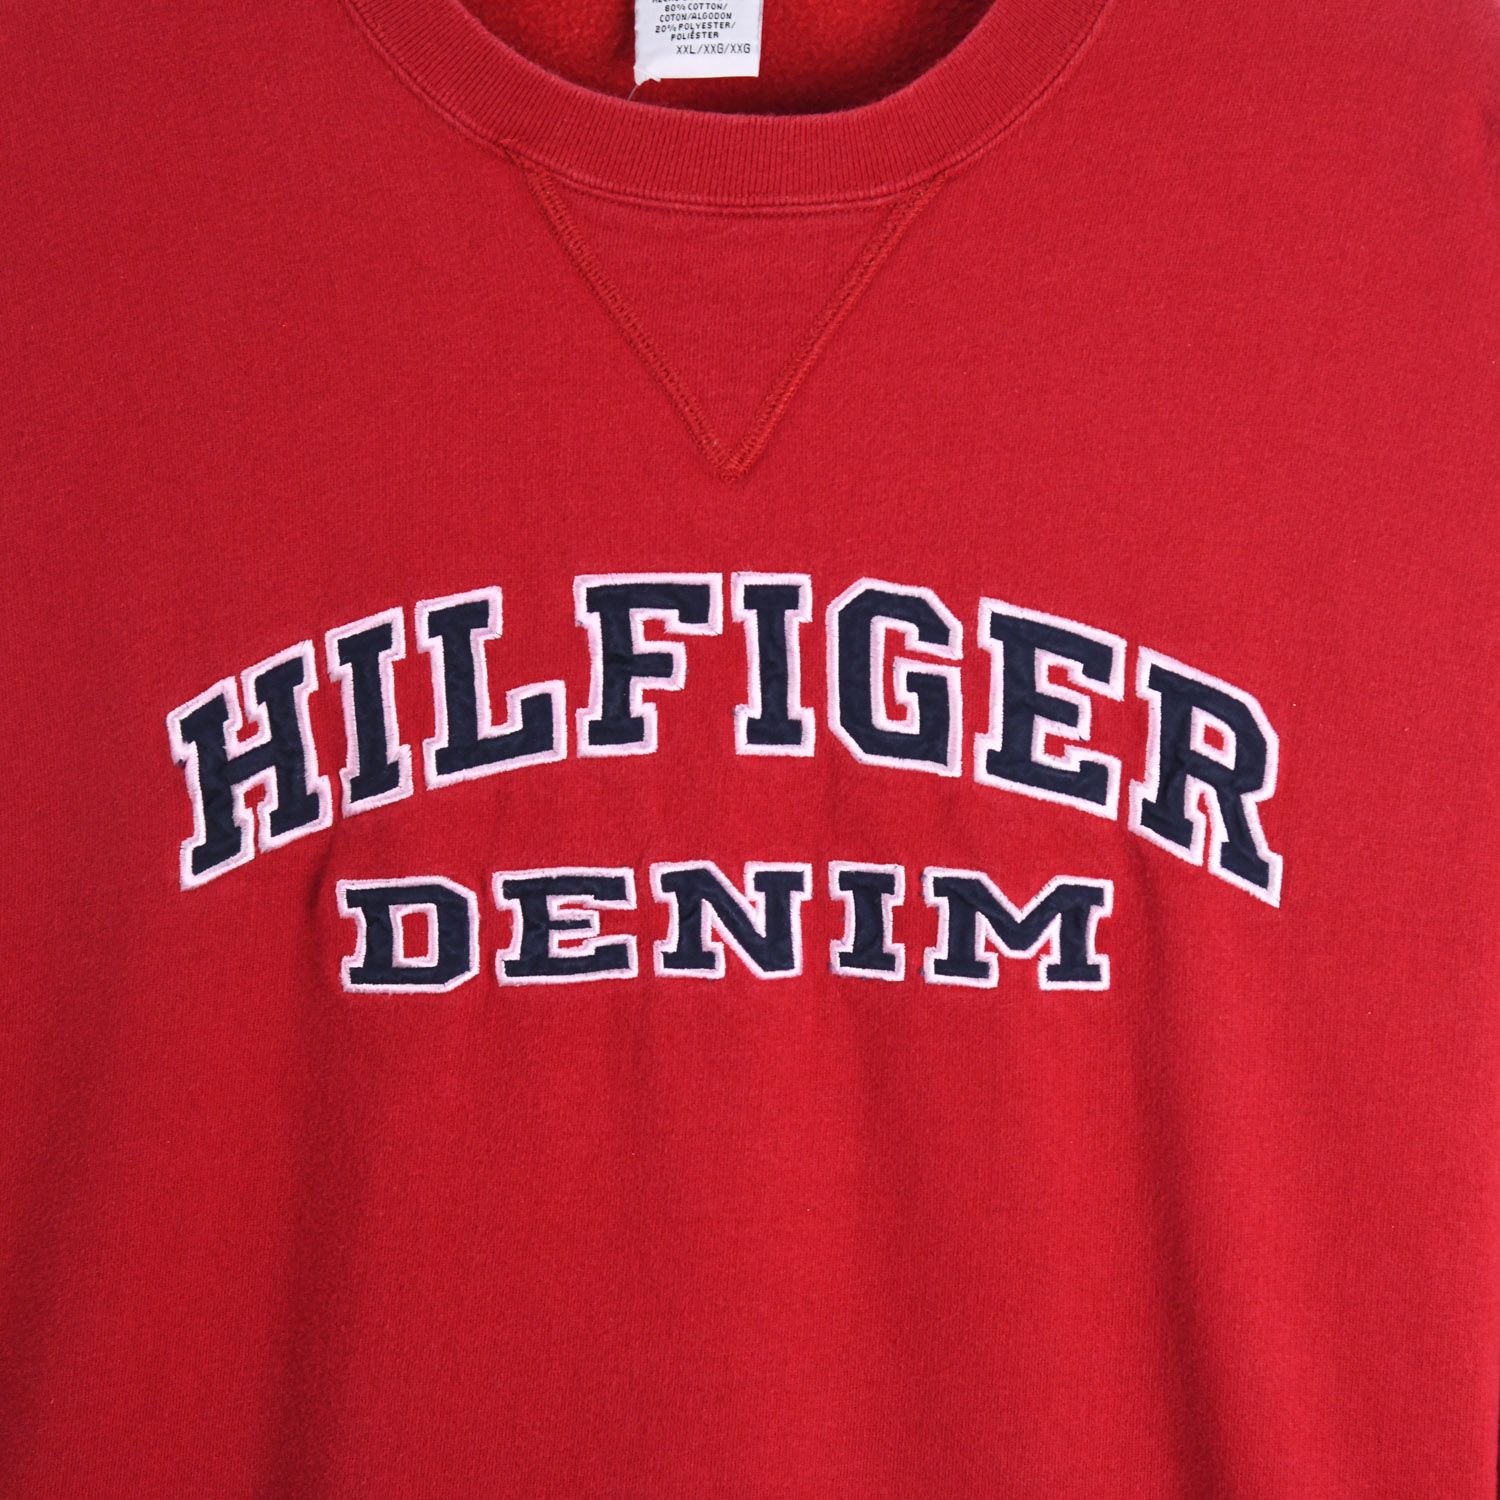 Tommy Hilfiger Sweatshirt (Embroidered spell out design)